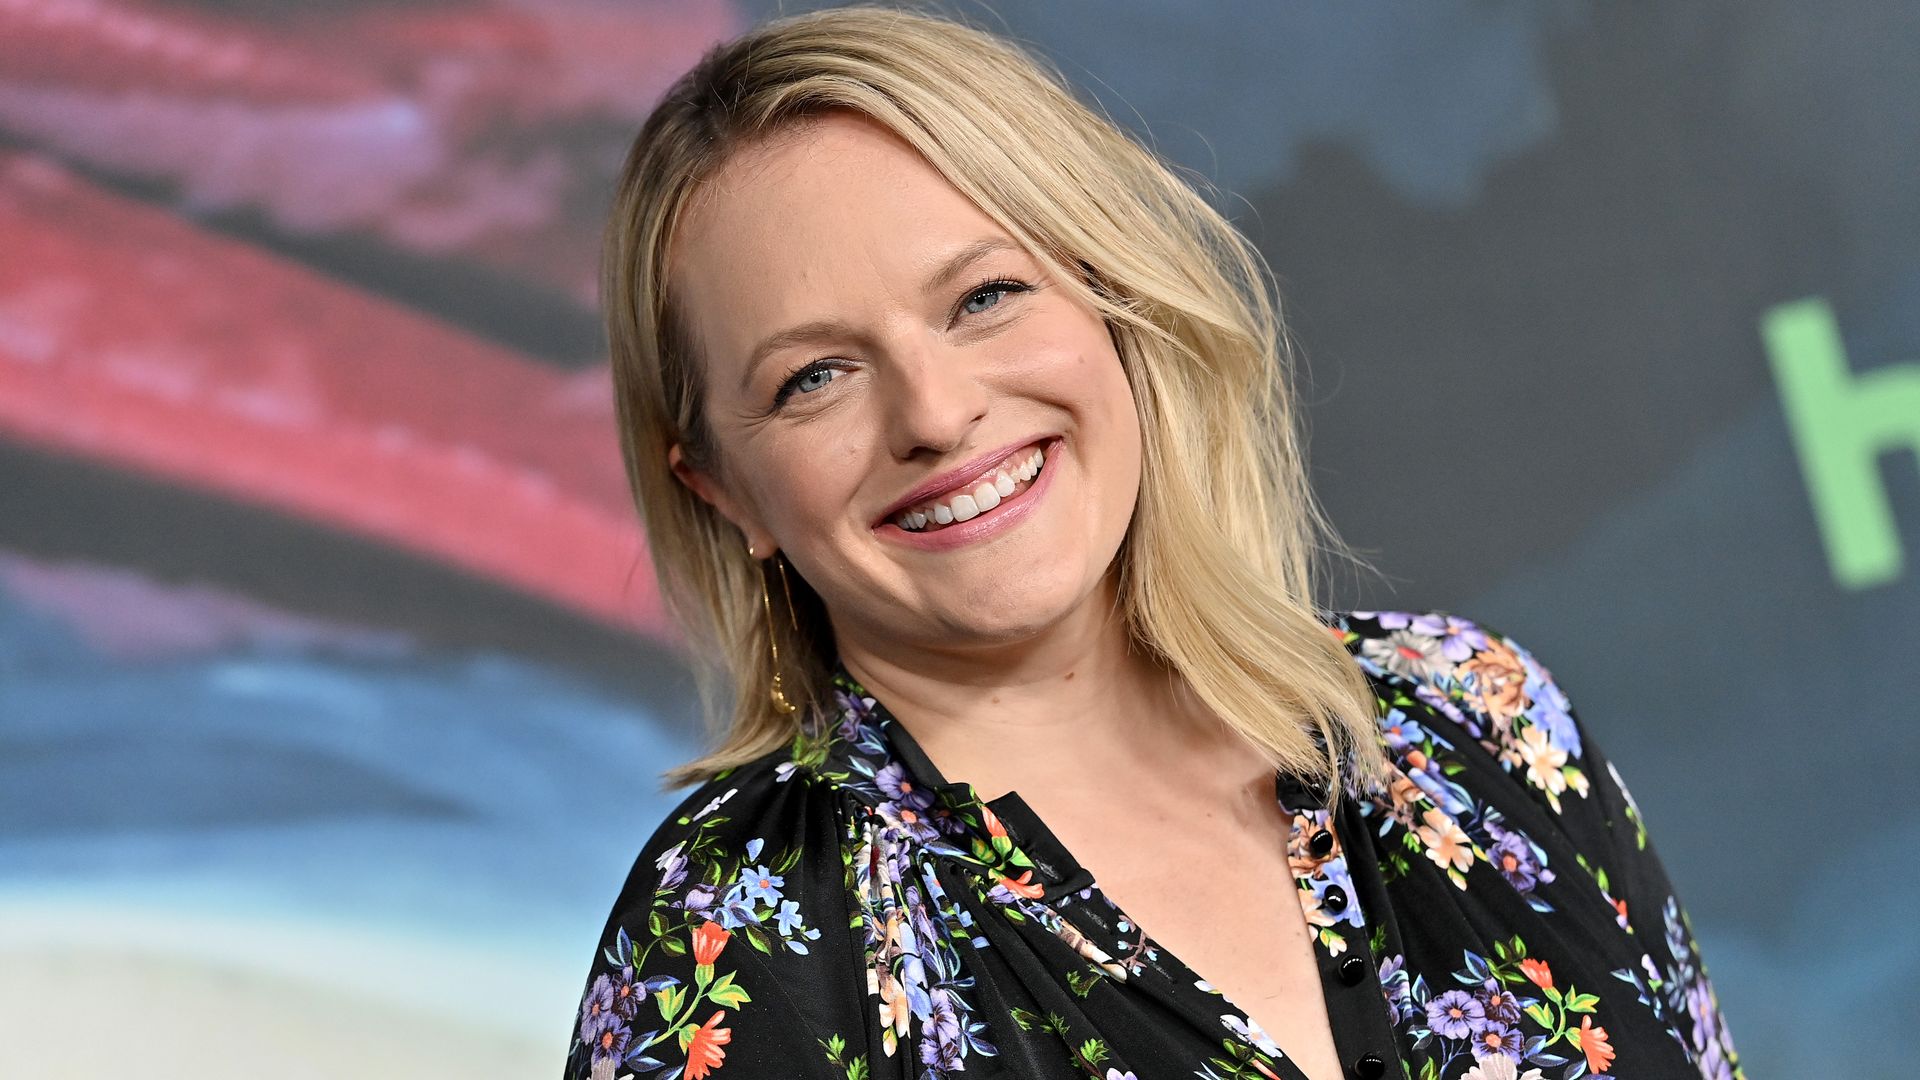 Elisabeth Moss attends the Season 5 Finale Event of Hulu's "The Handmaid's Tale" at Academy Museum of Motion Pictures on November 07, 2022 in Los Angeles, California